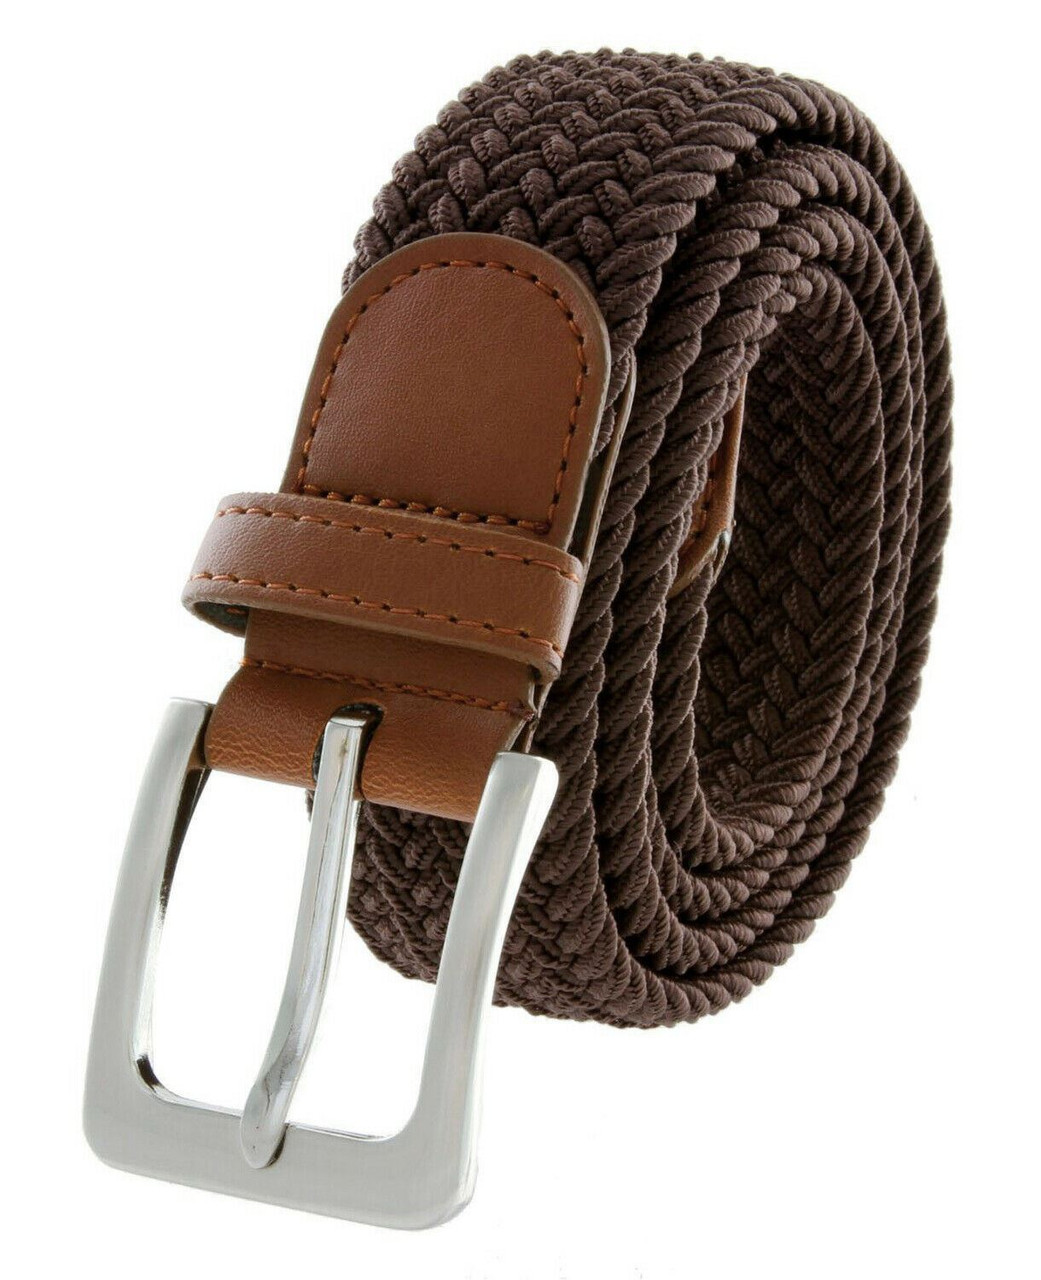 Men's Braided Belts Woven Leather Belts Adjustable Stretch Woven Belt  Handmade Braided Leather Belt with Buckle,Camel,110CM/43.3